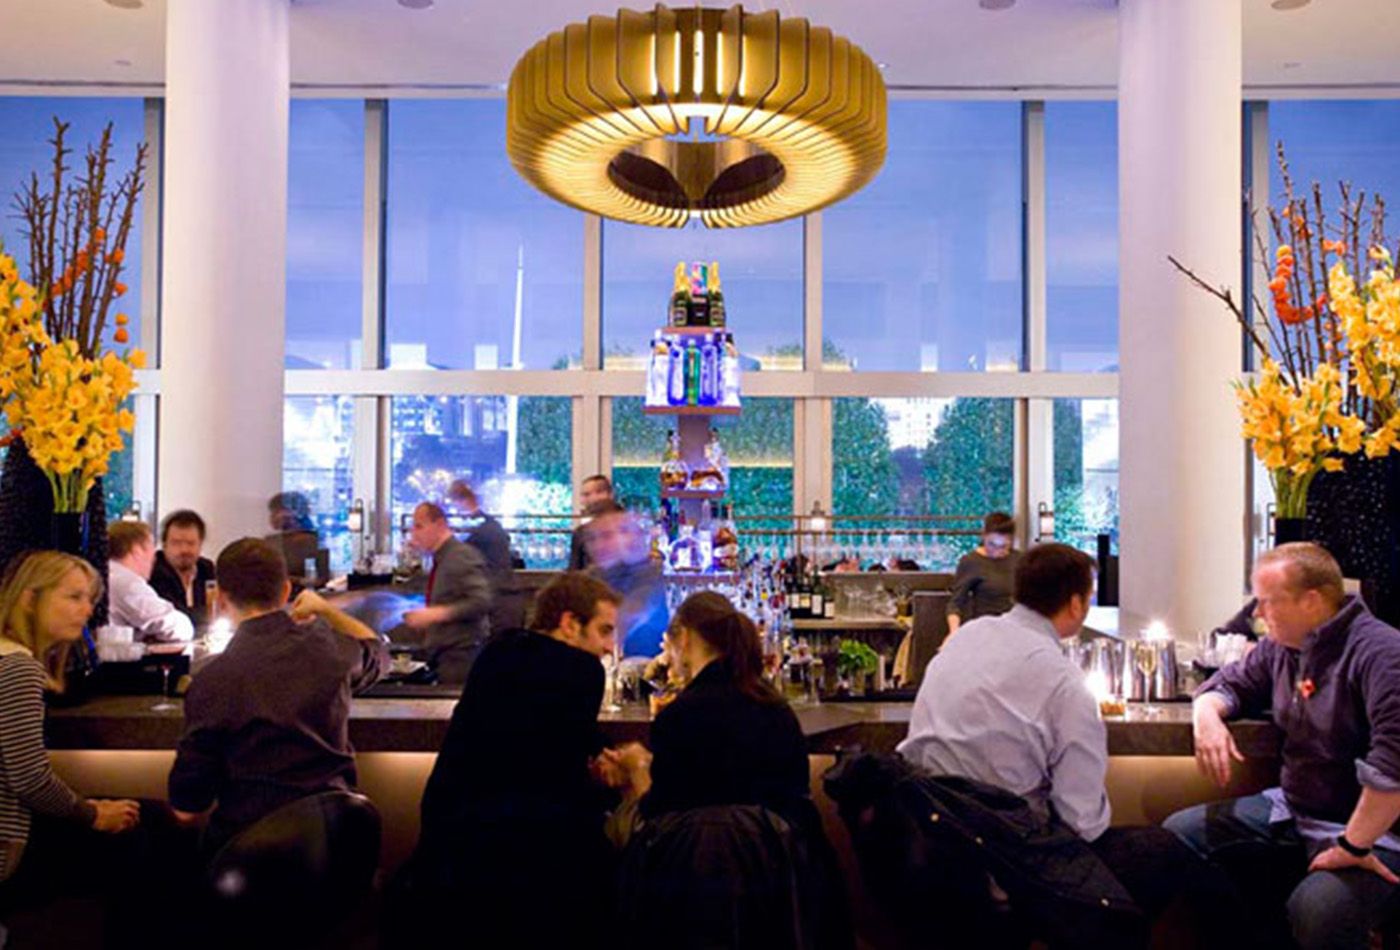 People enjoying a seat at the bar in the evening, large pendant light and views of the city in the background